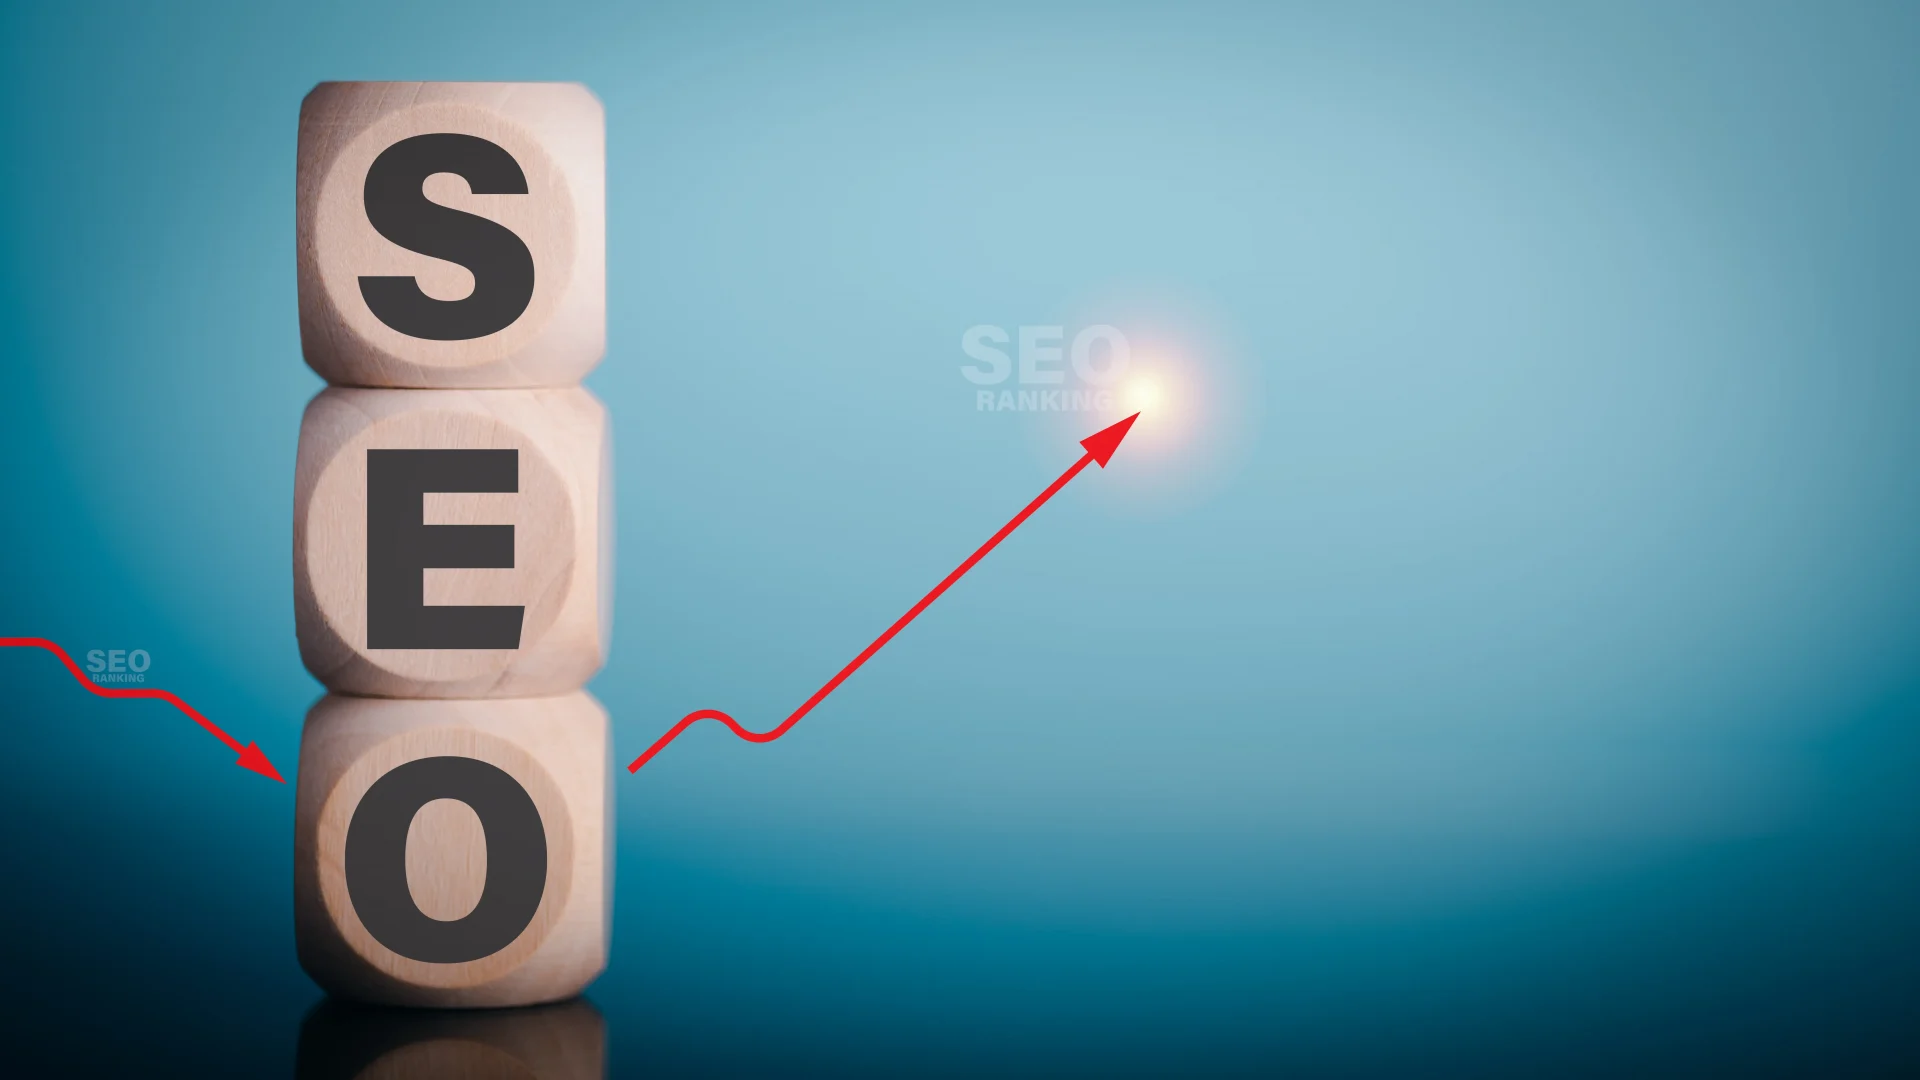 SEO letters on three large vertically placed dice. Red SEO curve from the left points upwards after reaching the dice. SEO provides growth.